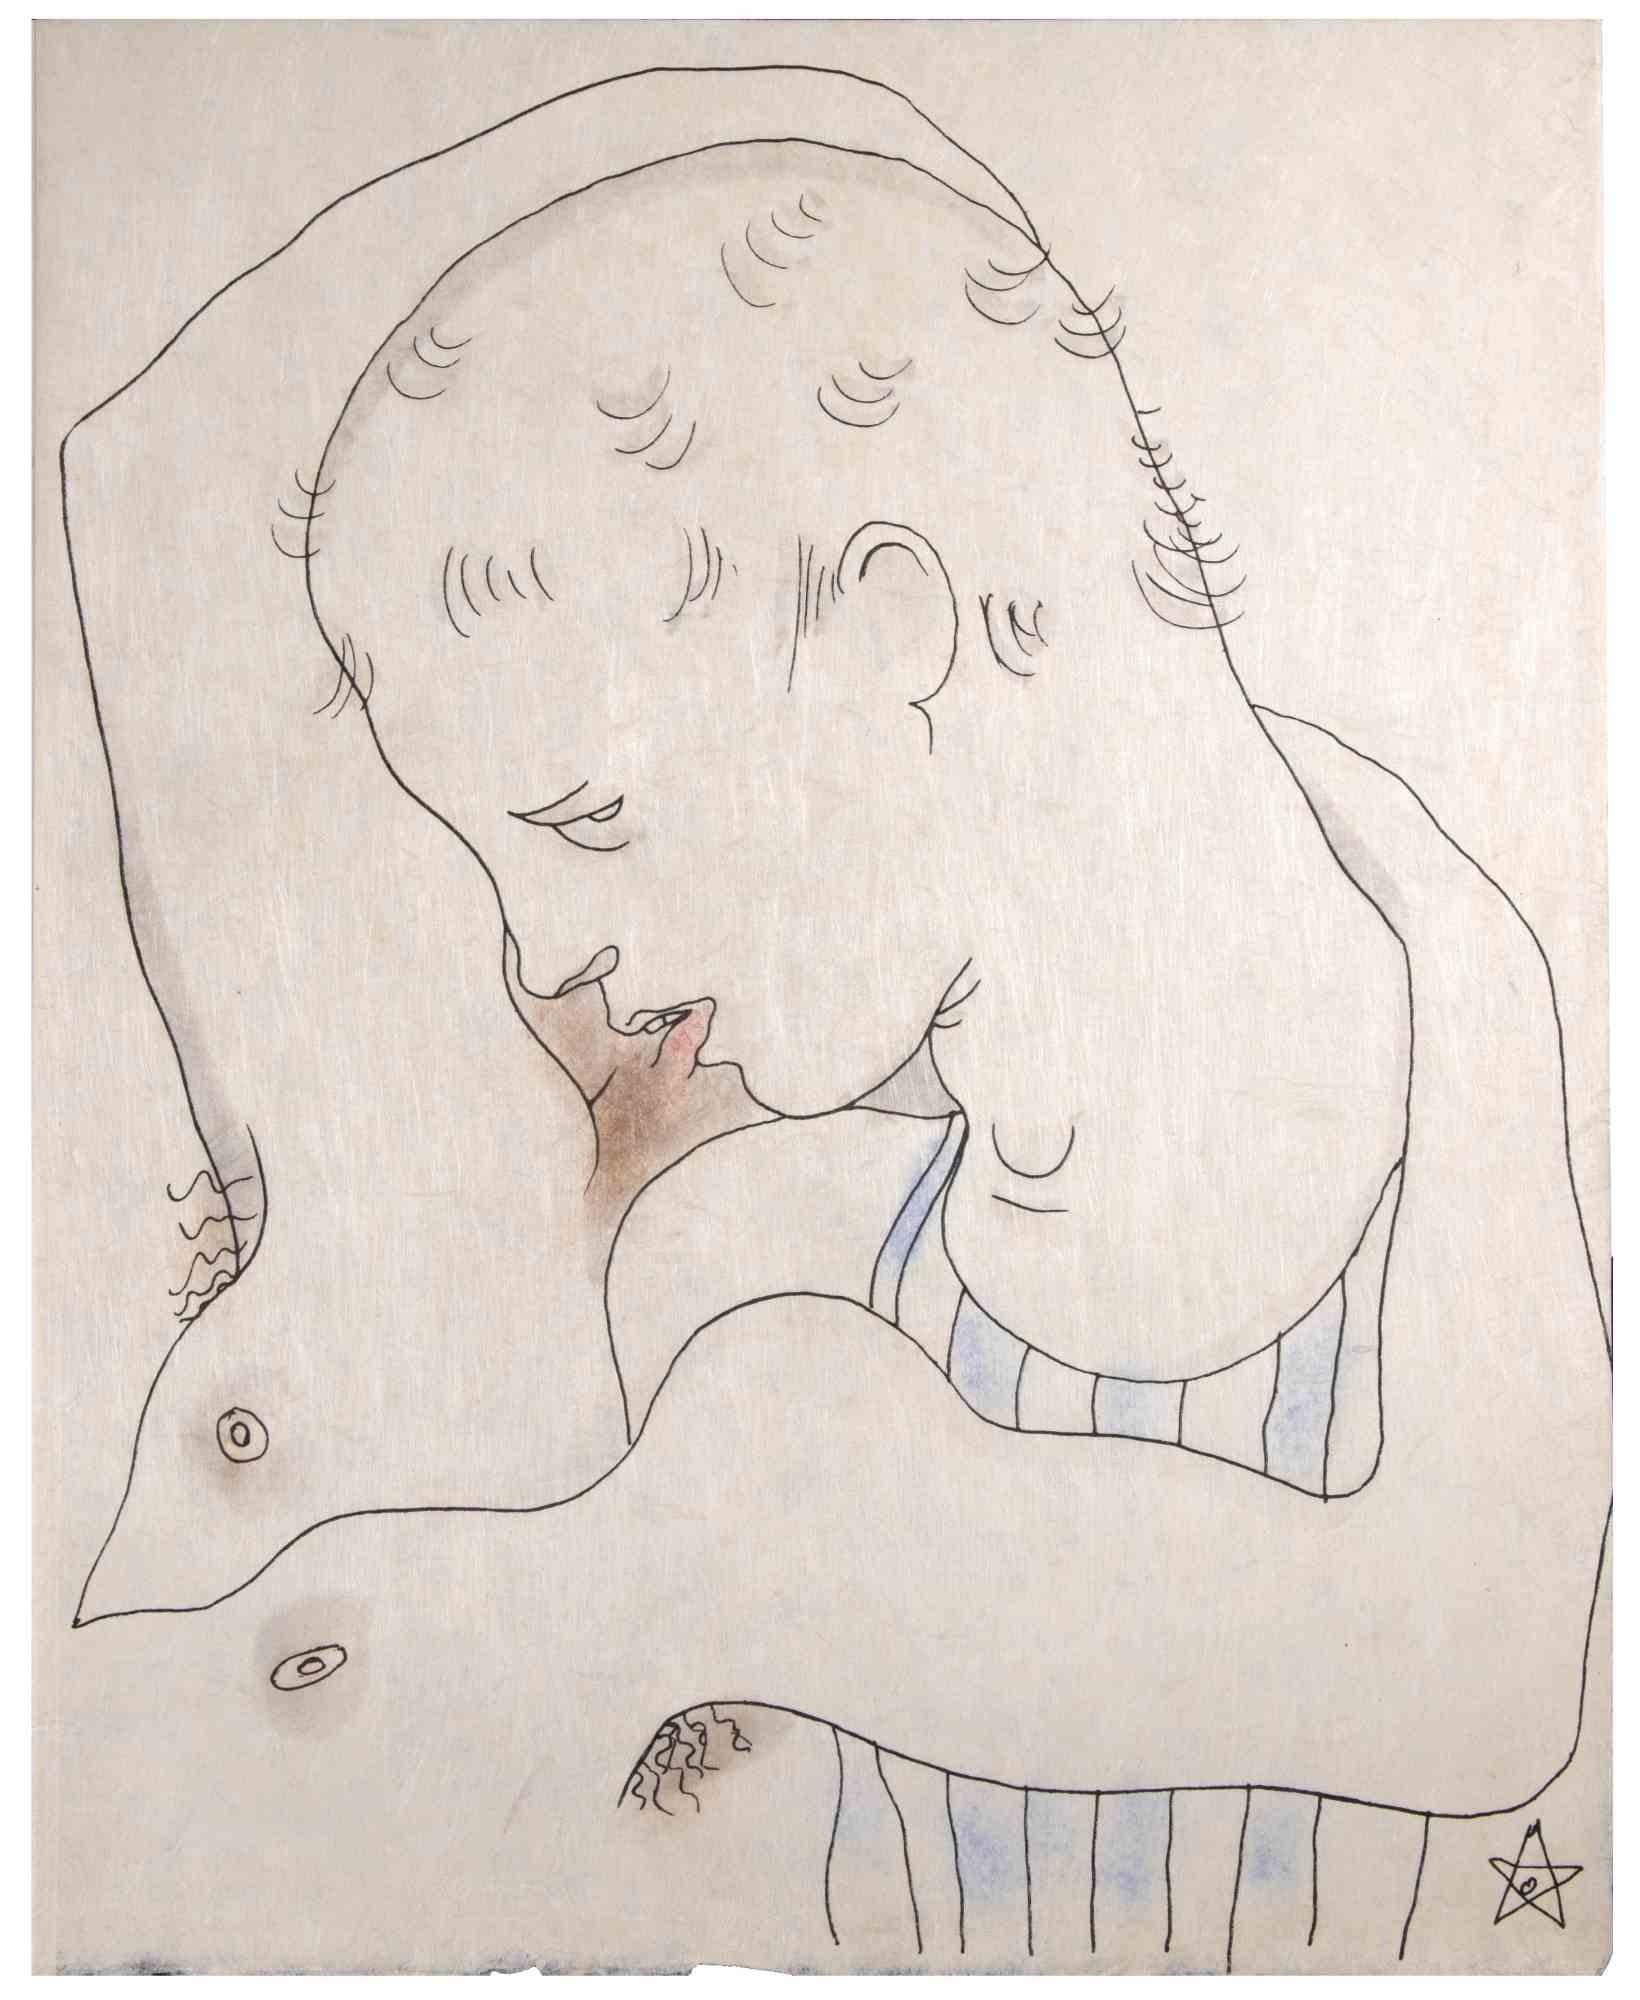 Erotic Scene - Lithograph by Jean Cocteau - 1930s